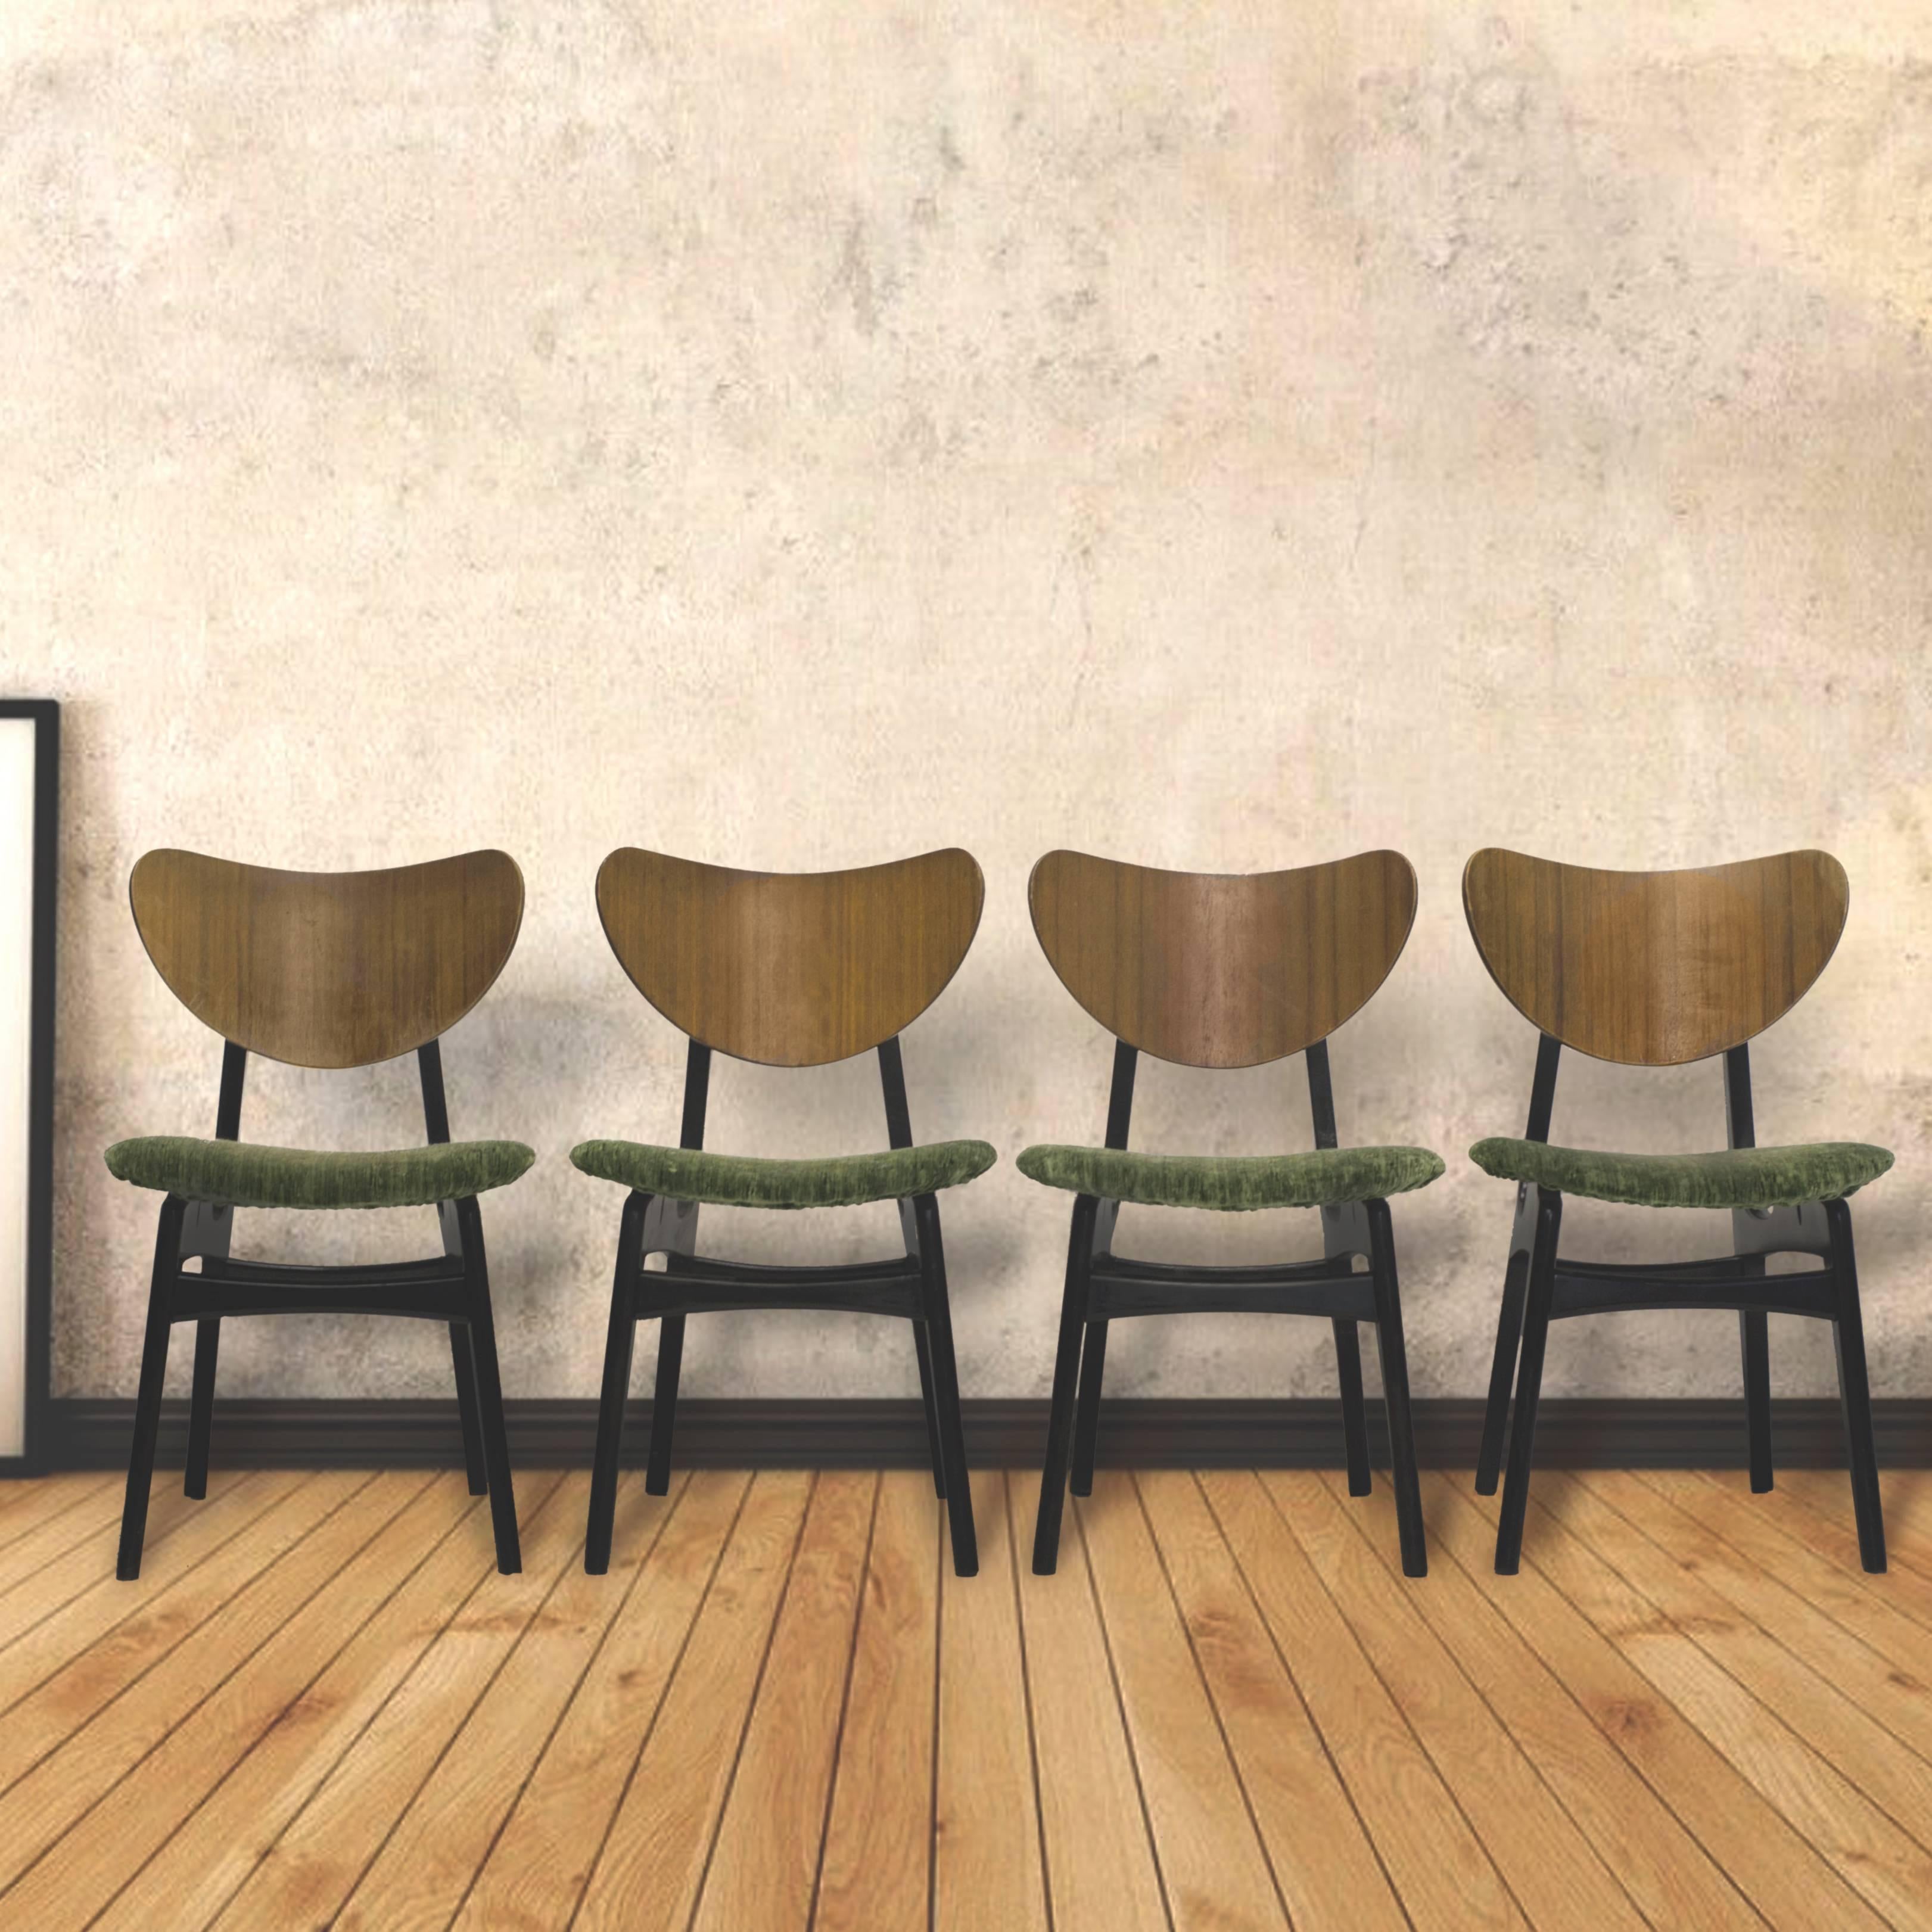 Four 1950s G plan butterfly dining chairs made from solid teak with original ebonised finish to the frames with tola butterfly backs.

Each seat has been lovingly re-upholstered in a beautiful green Sanderson textured velvet fabric.

Designed in